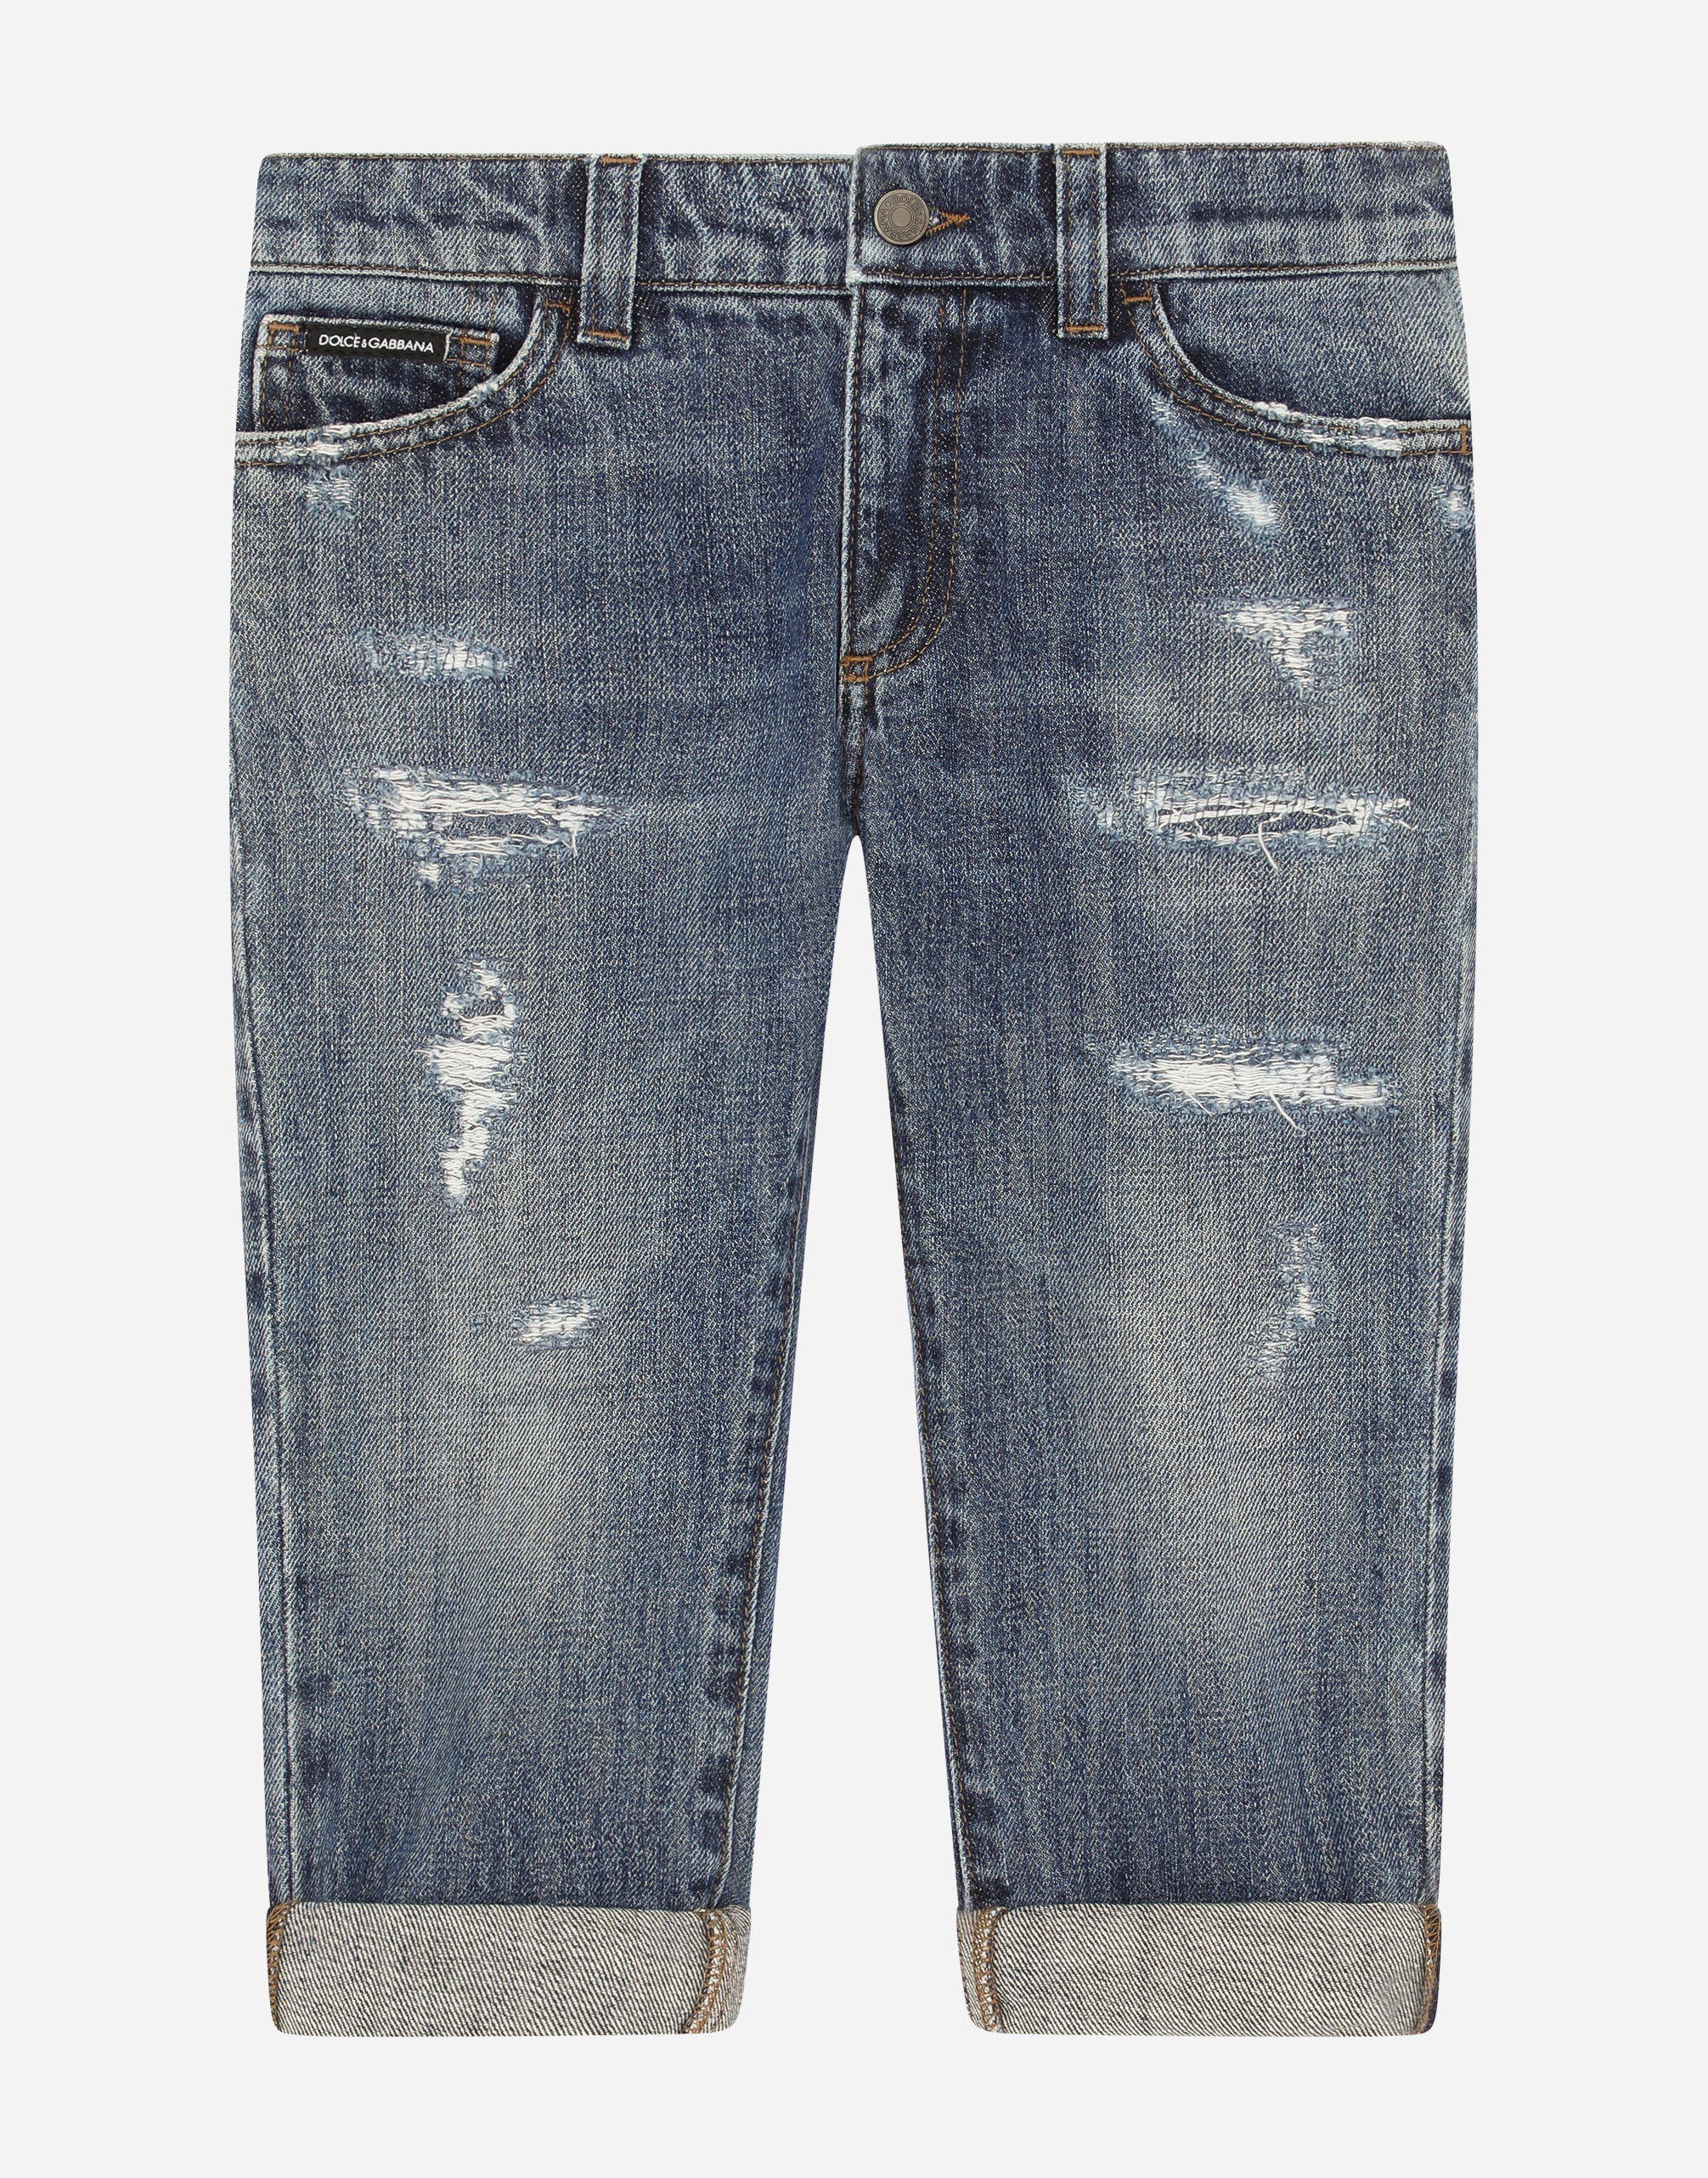 Blue wash jeans with abrasions in Blue